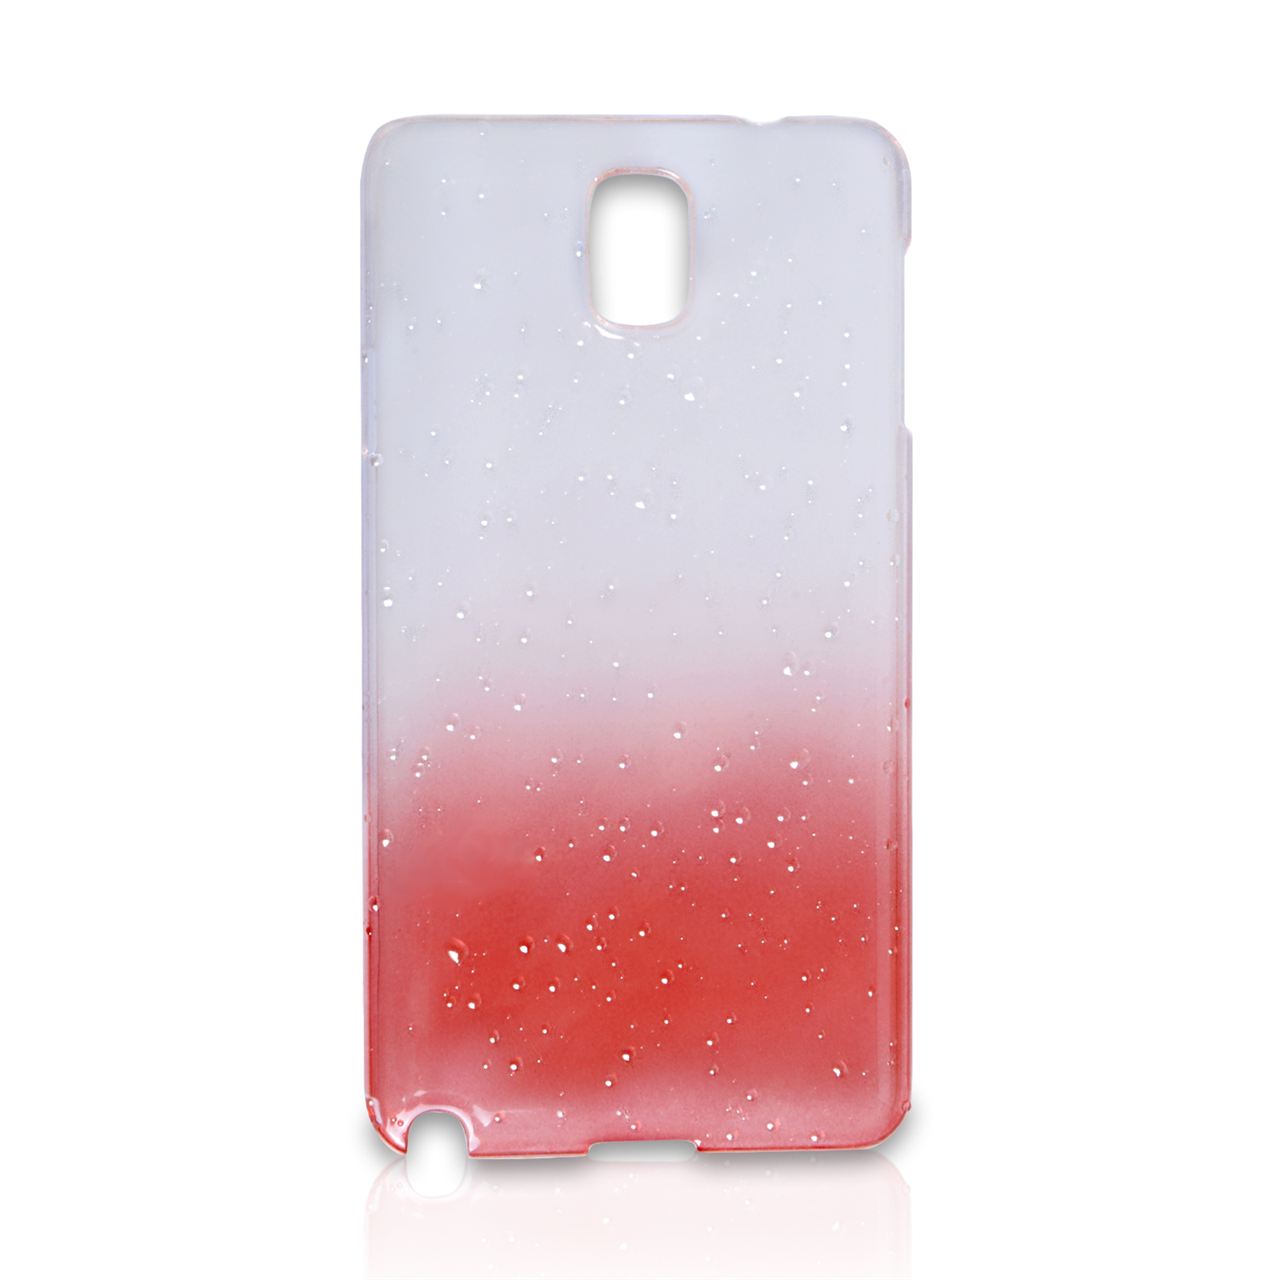 YouSave Accessories Samsung Galaxy Note 3 Waterdrop Hard Case - Red